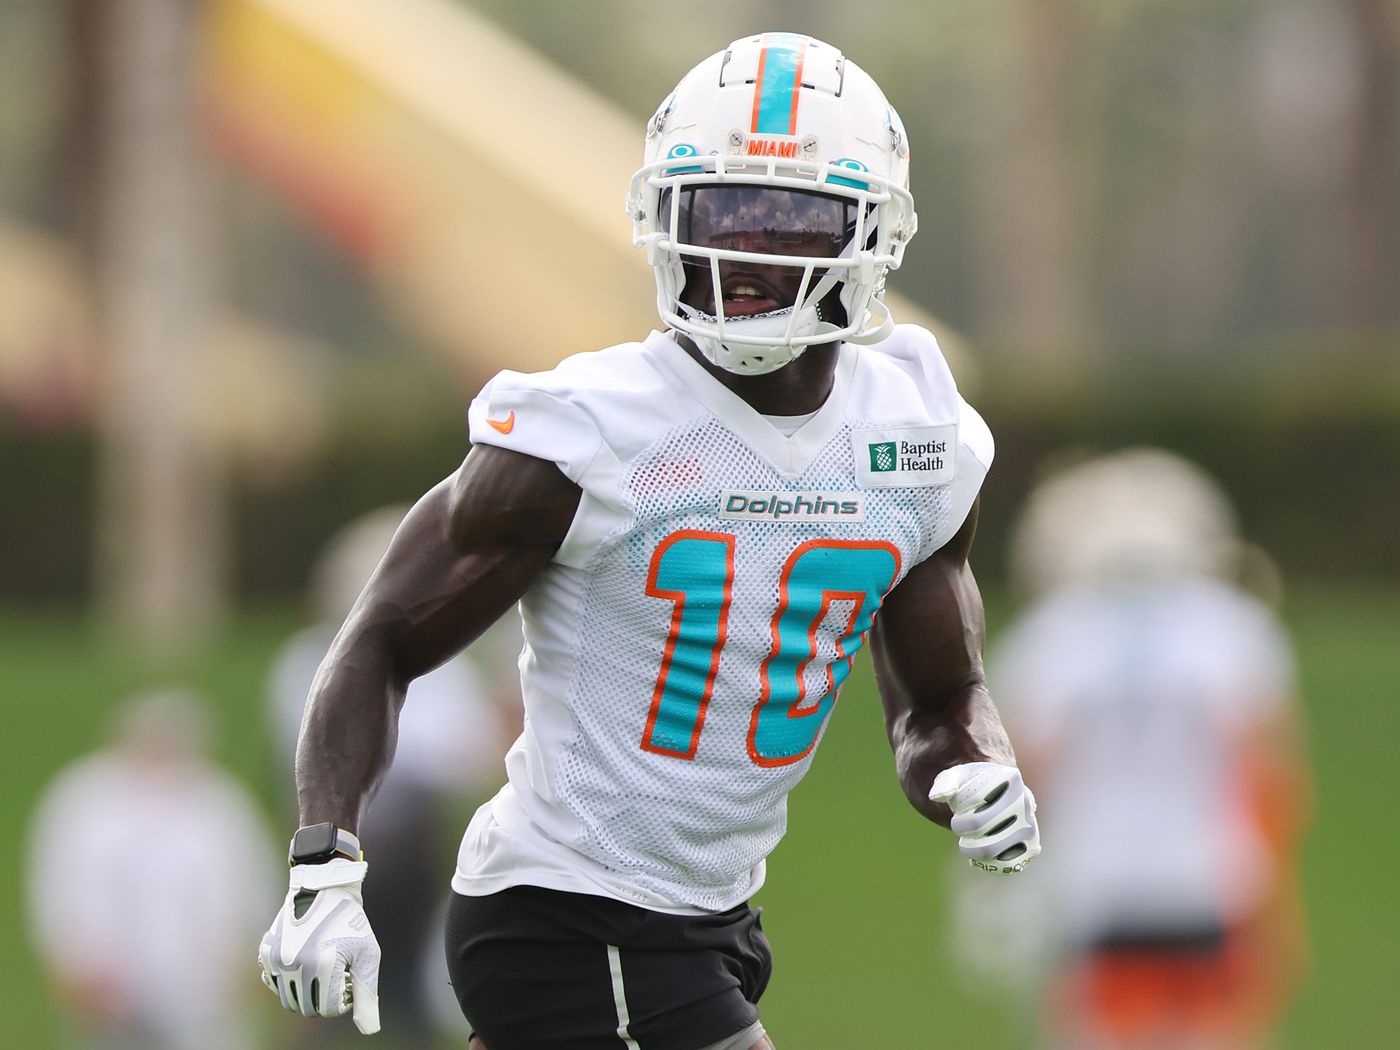 Tyreek Hill says Miami Dolphins have the fastest WR duo of “All Time”; pleads with Madden to give him a 100 speed rating